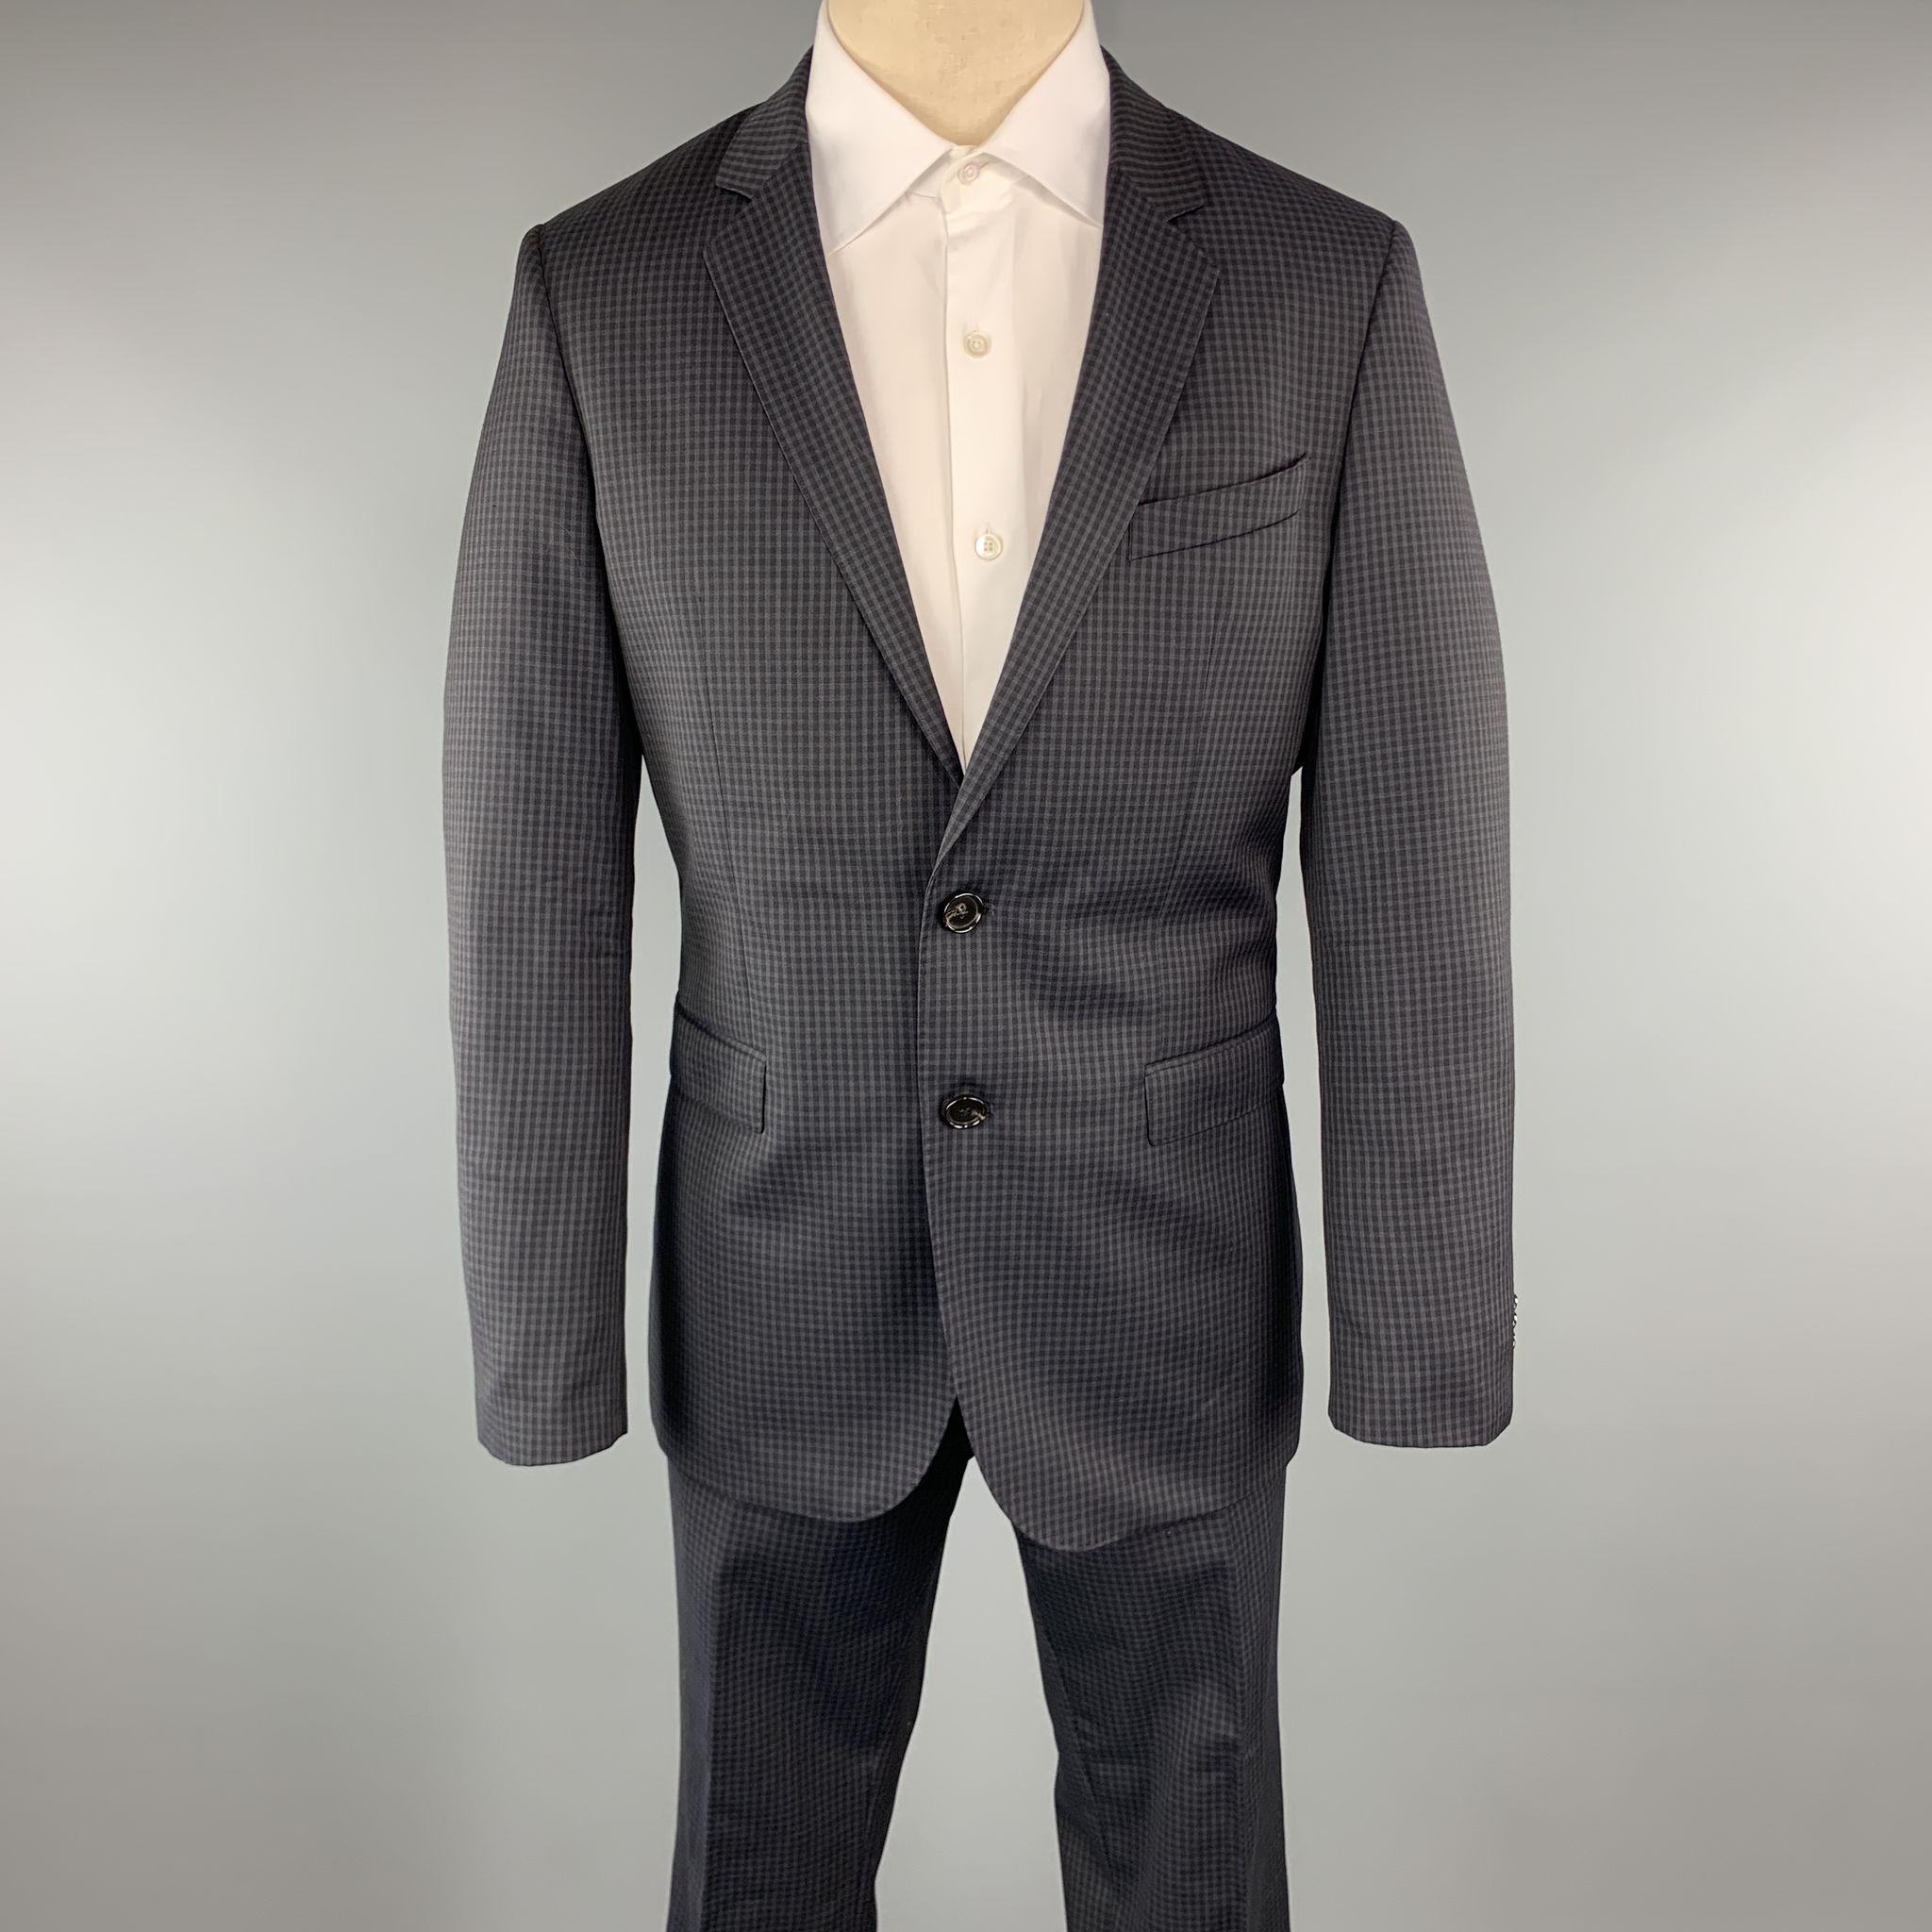 HUGO BOSS Suit comes in a navy checkered wool and includes a single breasted, two button sport coat with a notch lapel and matching front trousers. 

Excellent Pre-Owned Condition.
Marked: 50

Measurements:

-Jacket
Shoulder: 16 in. 
Chest: 40 in.